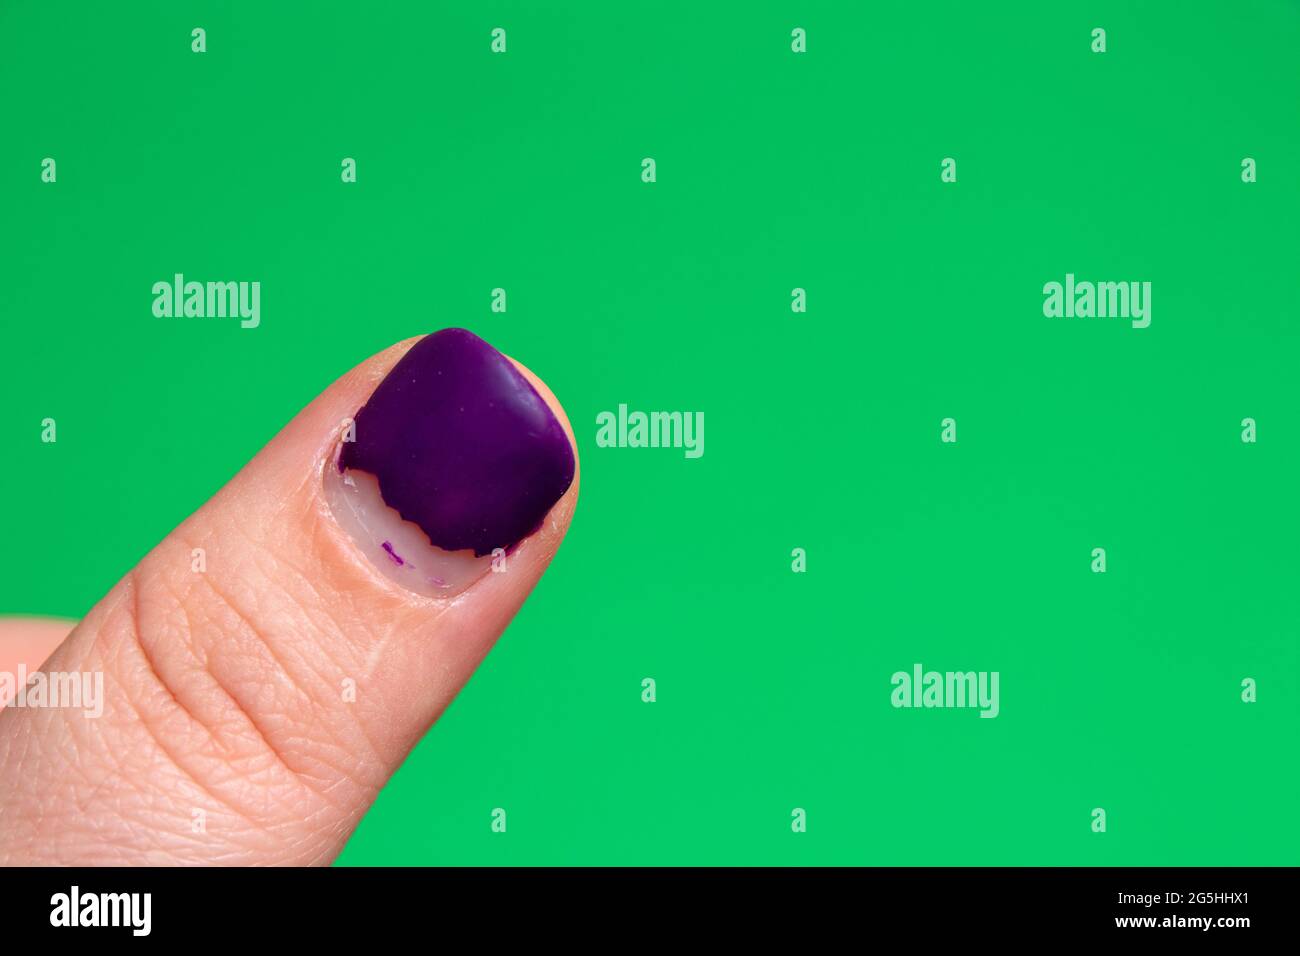 The nail of the thumb with the damaged nail polish is purple. Green background with space for text. Selective focus. Stock Photo